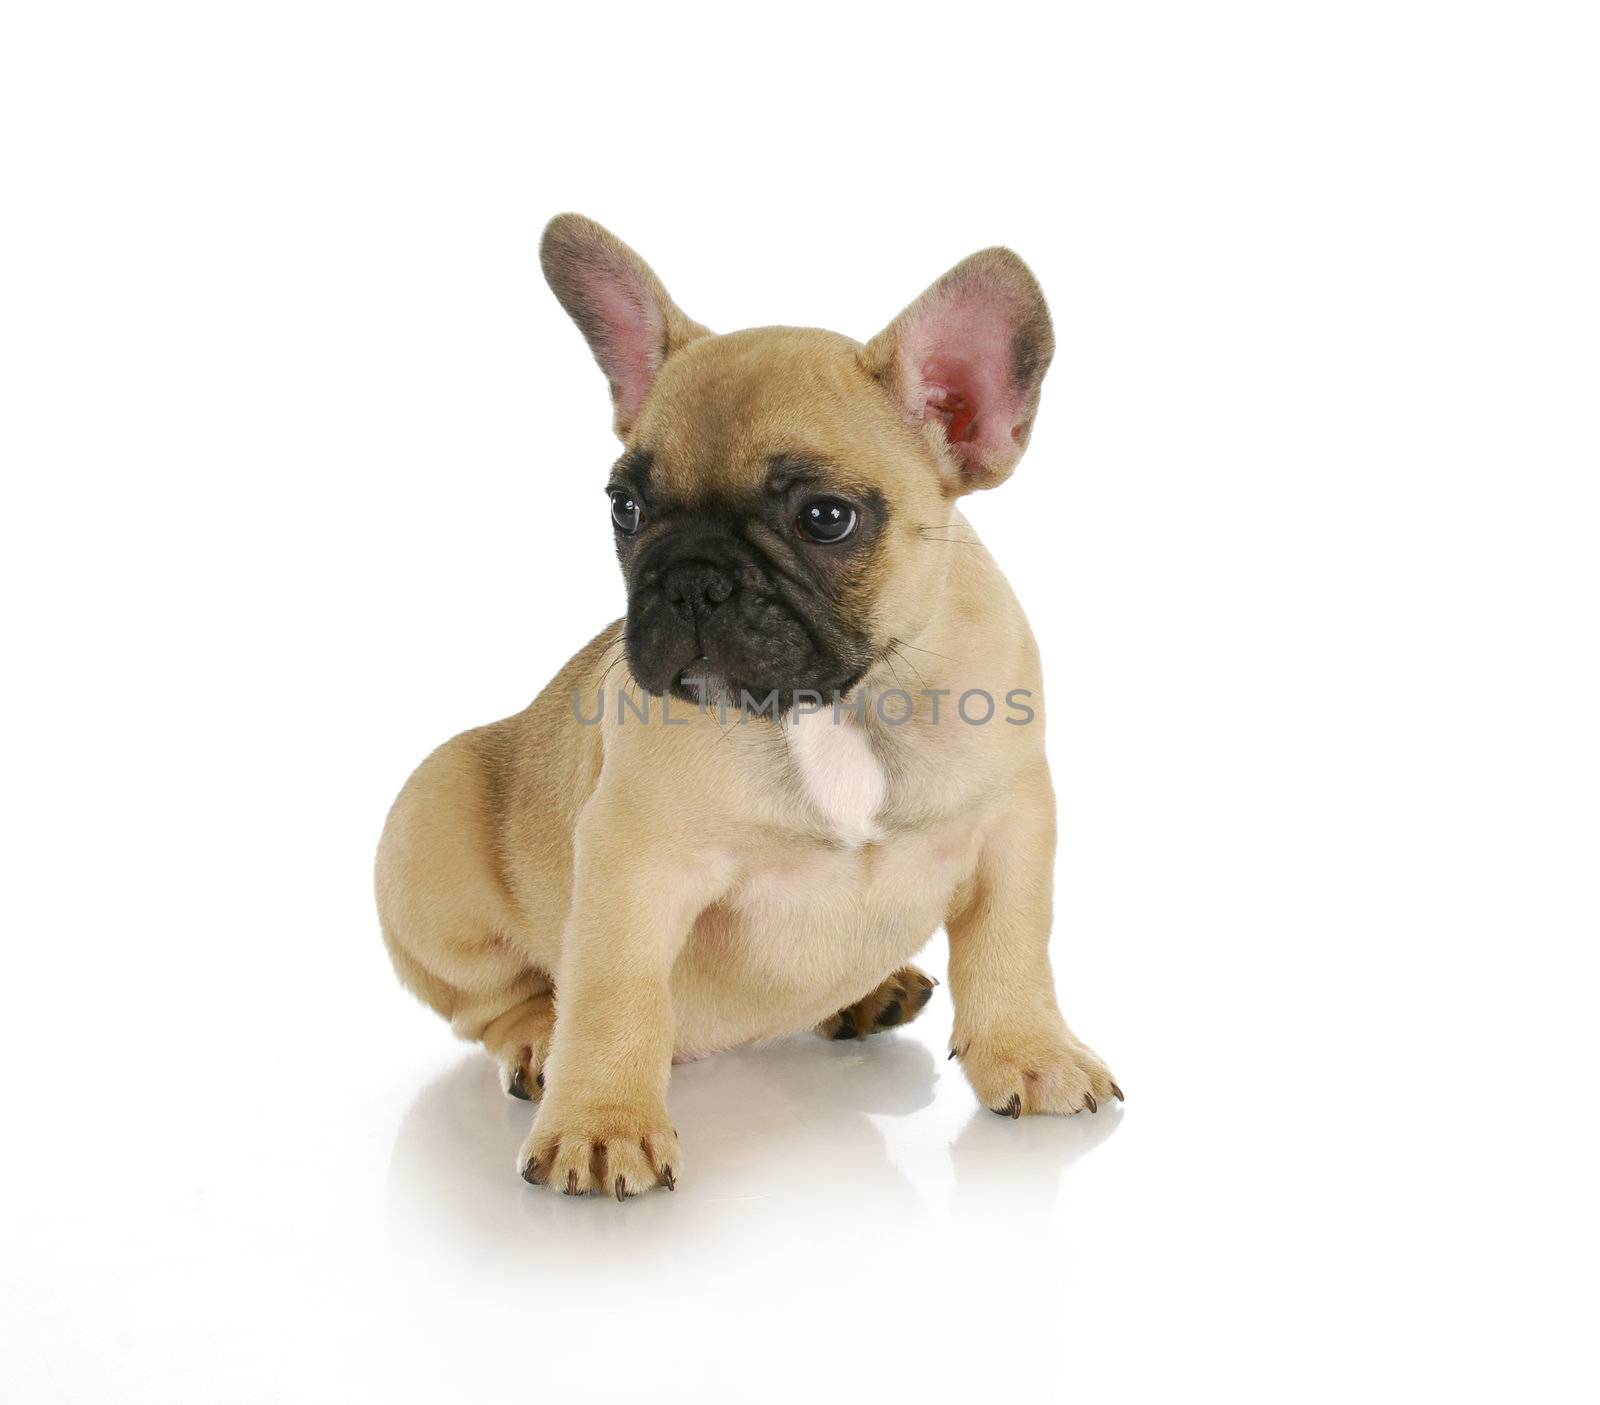 cute puppy - french bulldog sitting on white background - 8 weeks old